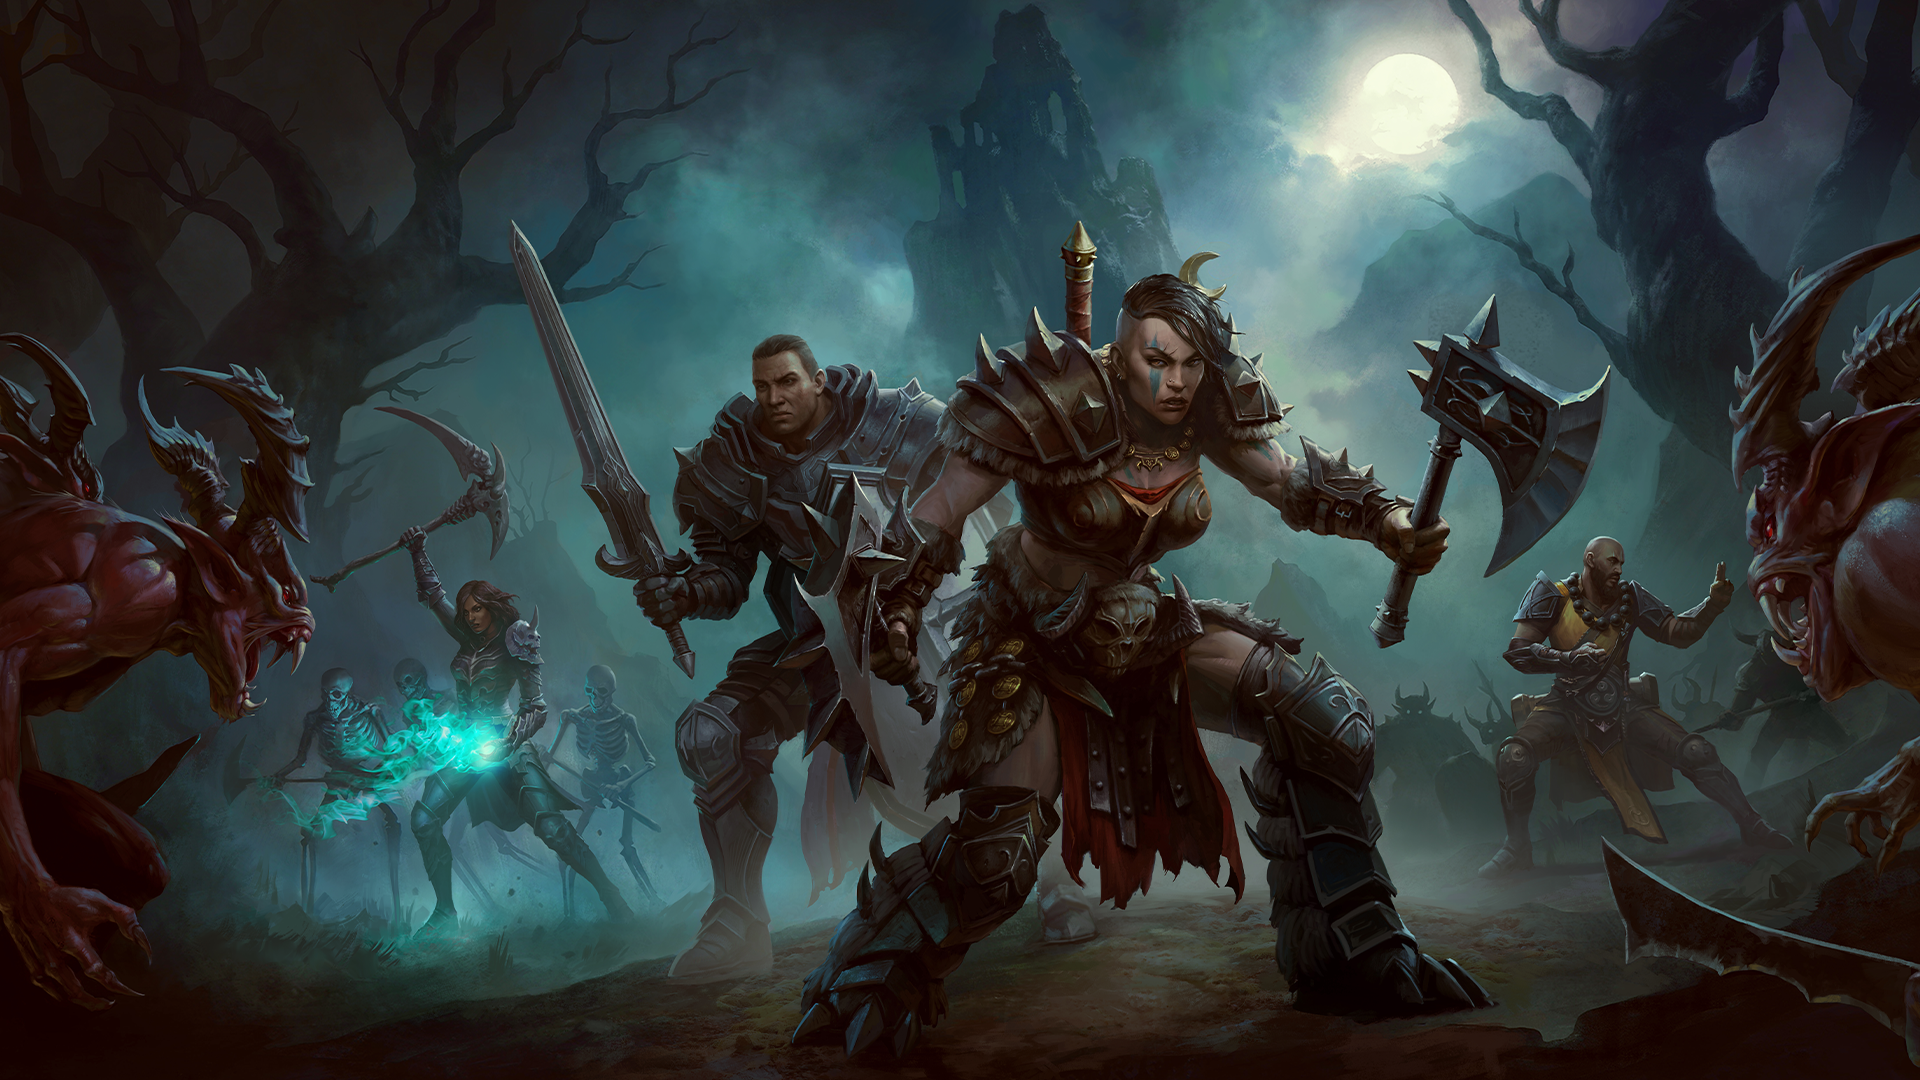 Update: Diablo Immortal just got a whole lot bloodier with the